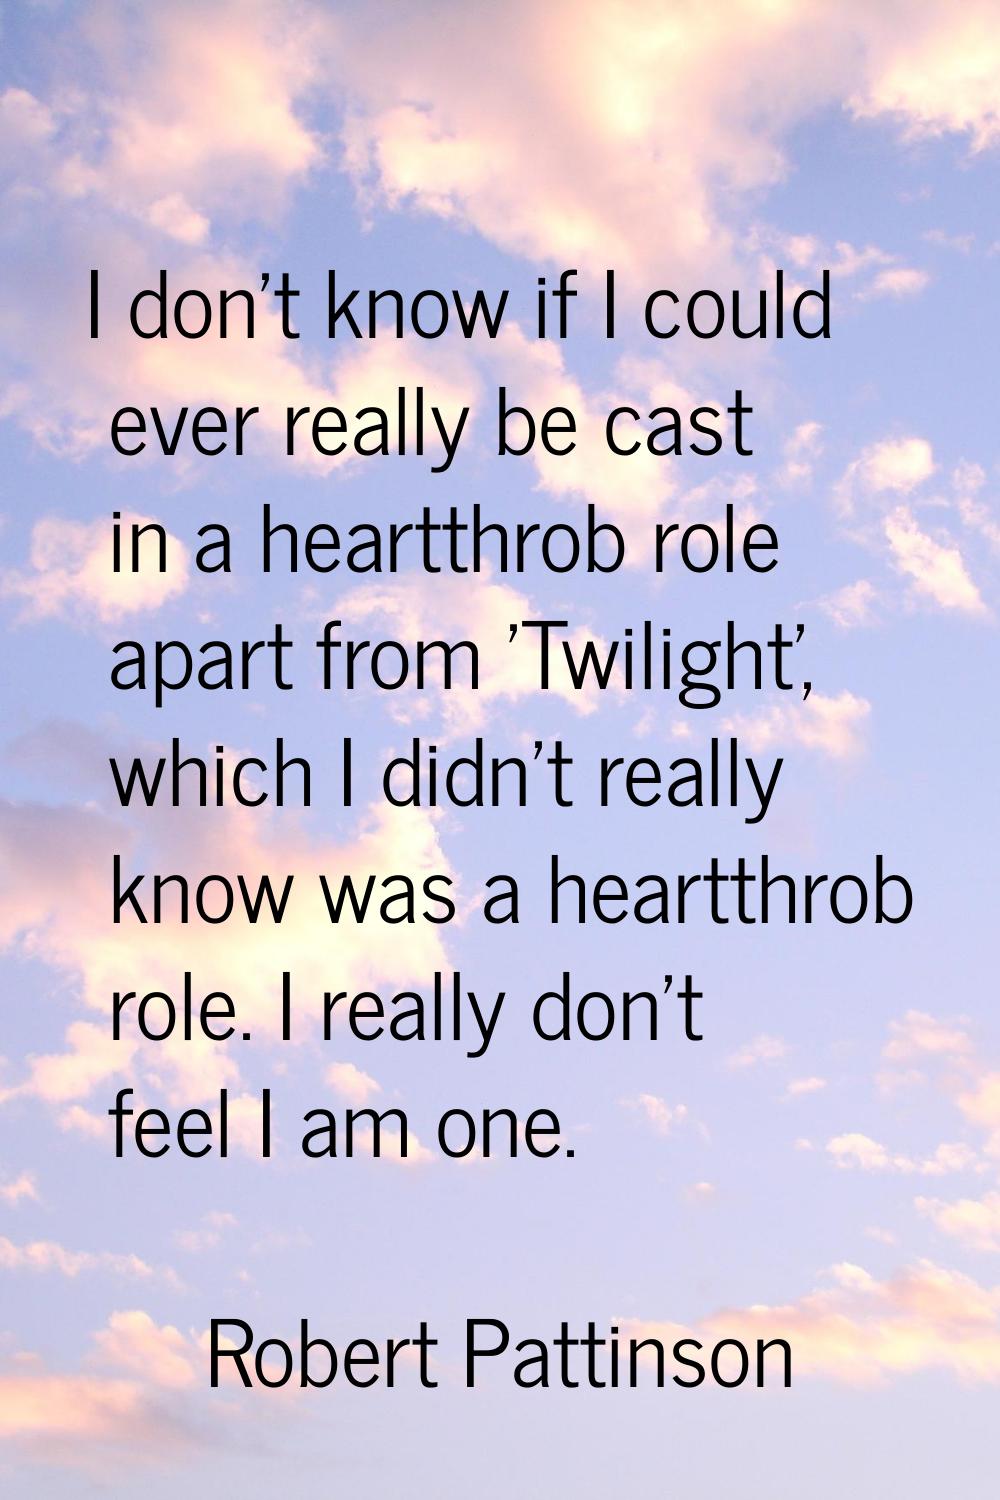 I don't know if I could ever really be cast in a heartthrob role apart from 'Twilight', which I did